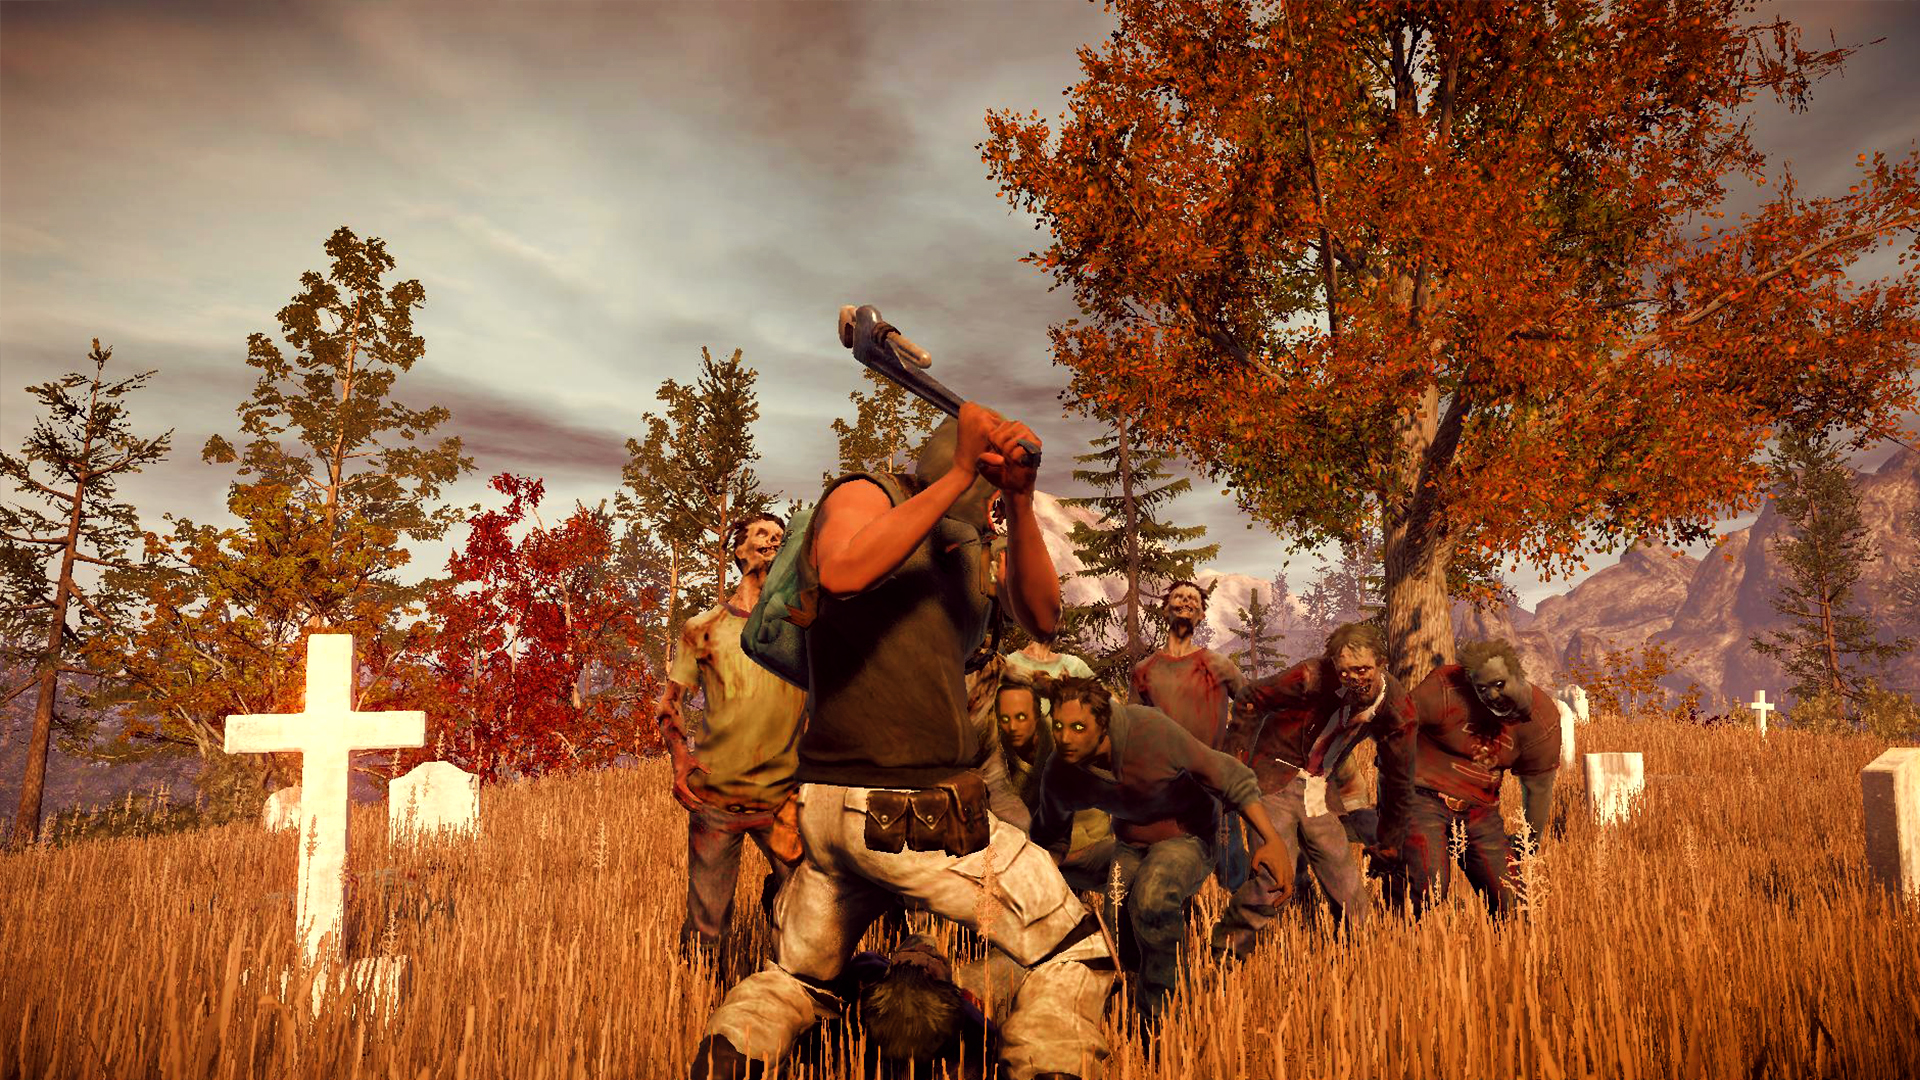 State of Decay Preview - Zombie Sandbox State Of Decay Coming In June To  Xbox Live and PC - Game Informer